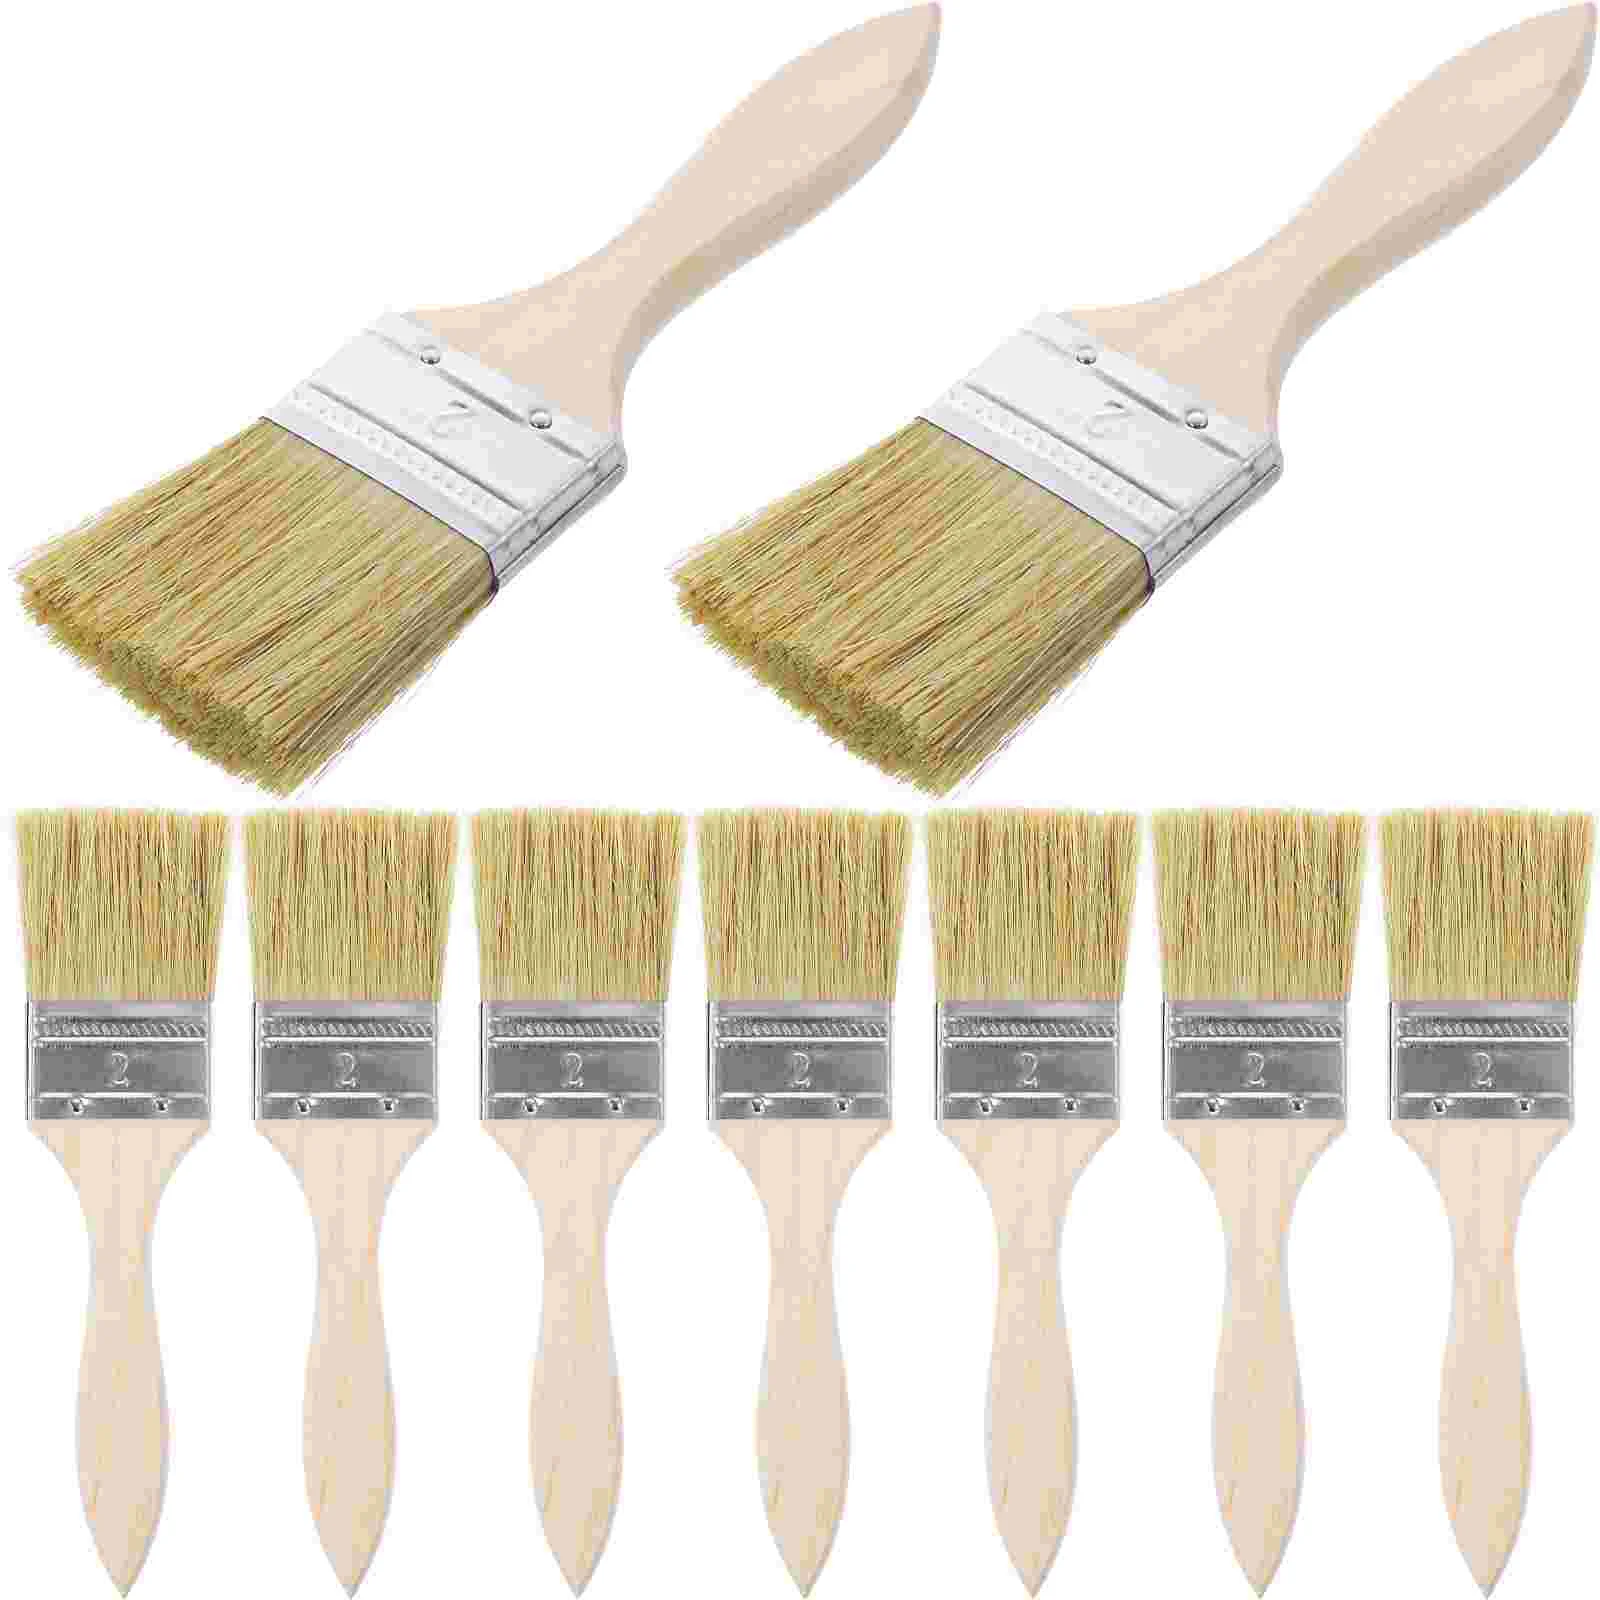 

23pcs brush brushes for walls set paintbrushes- Brushes Wooden Handle Premium Durable Painting Tool for Wall Furniture Home